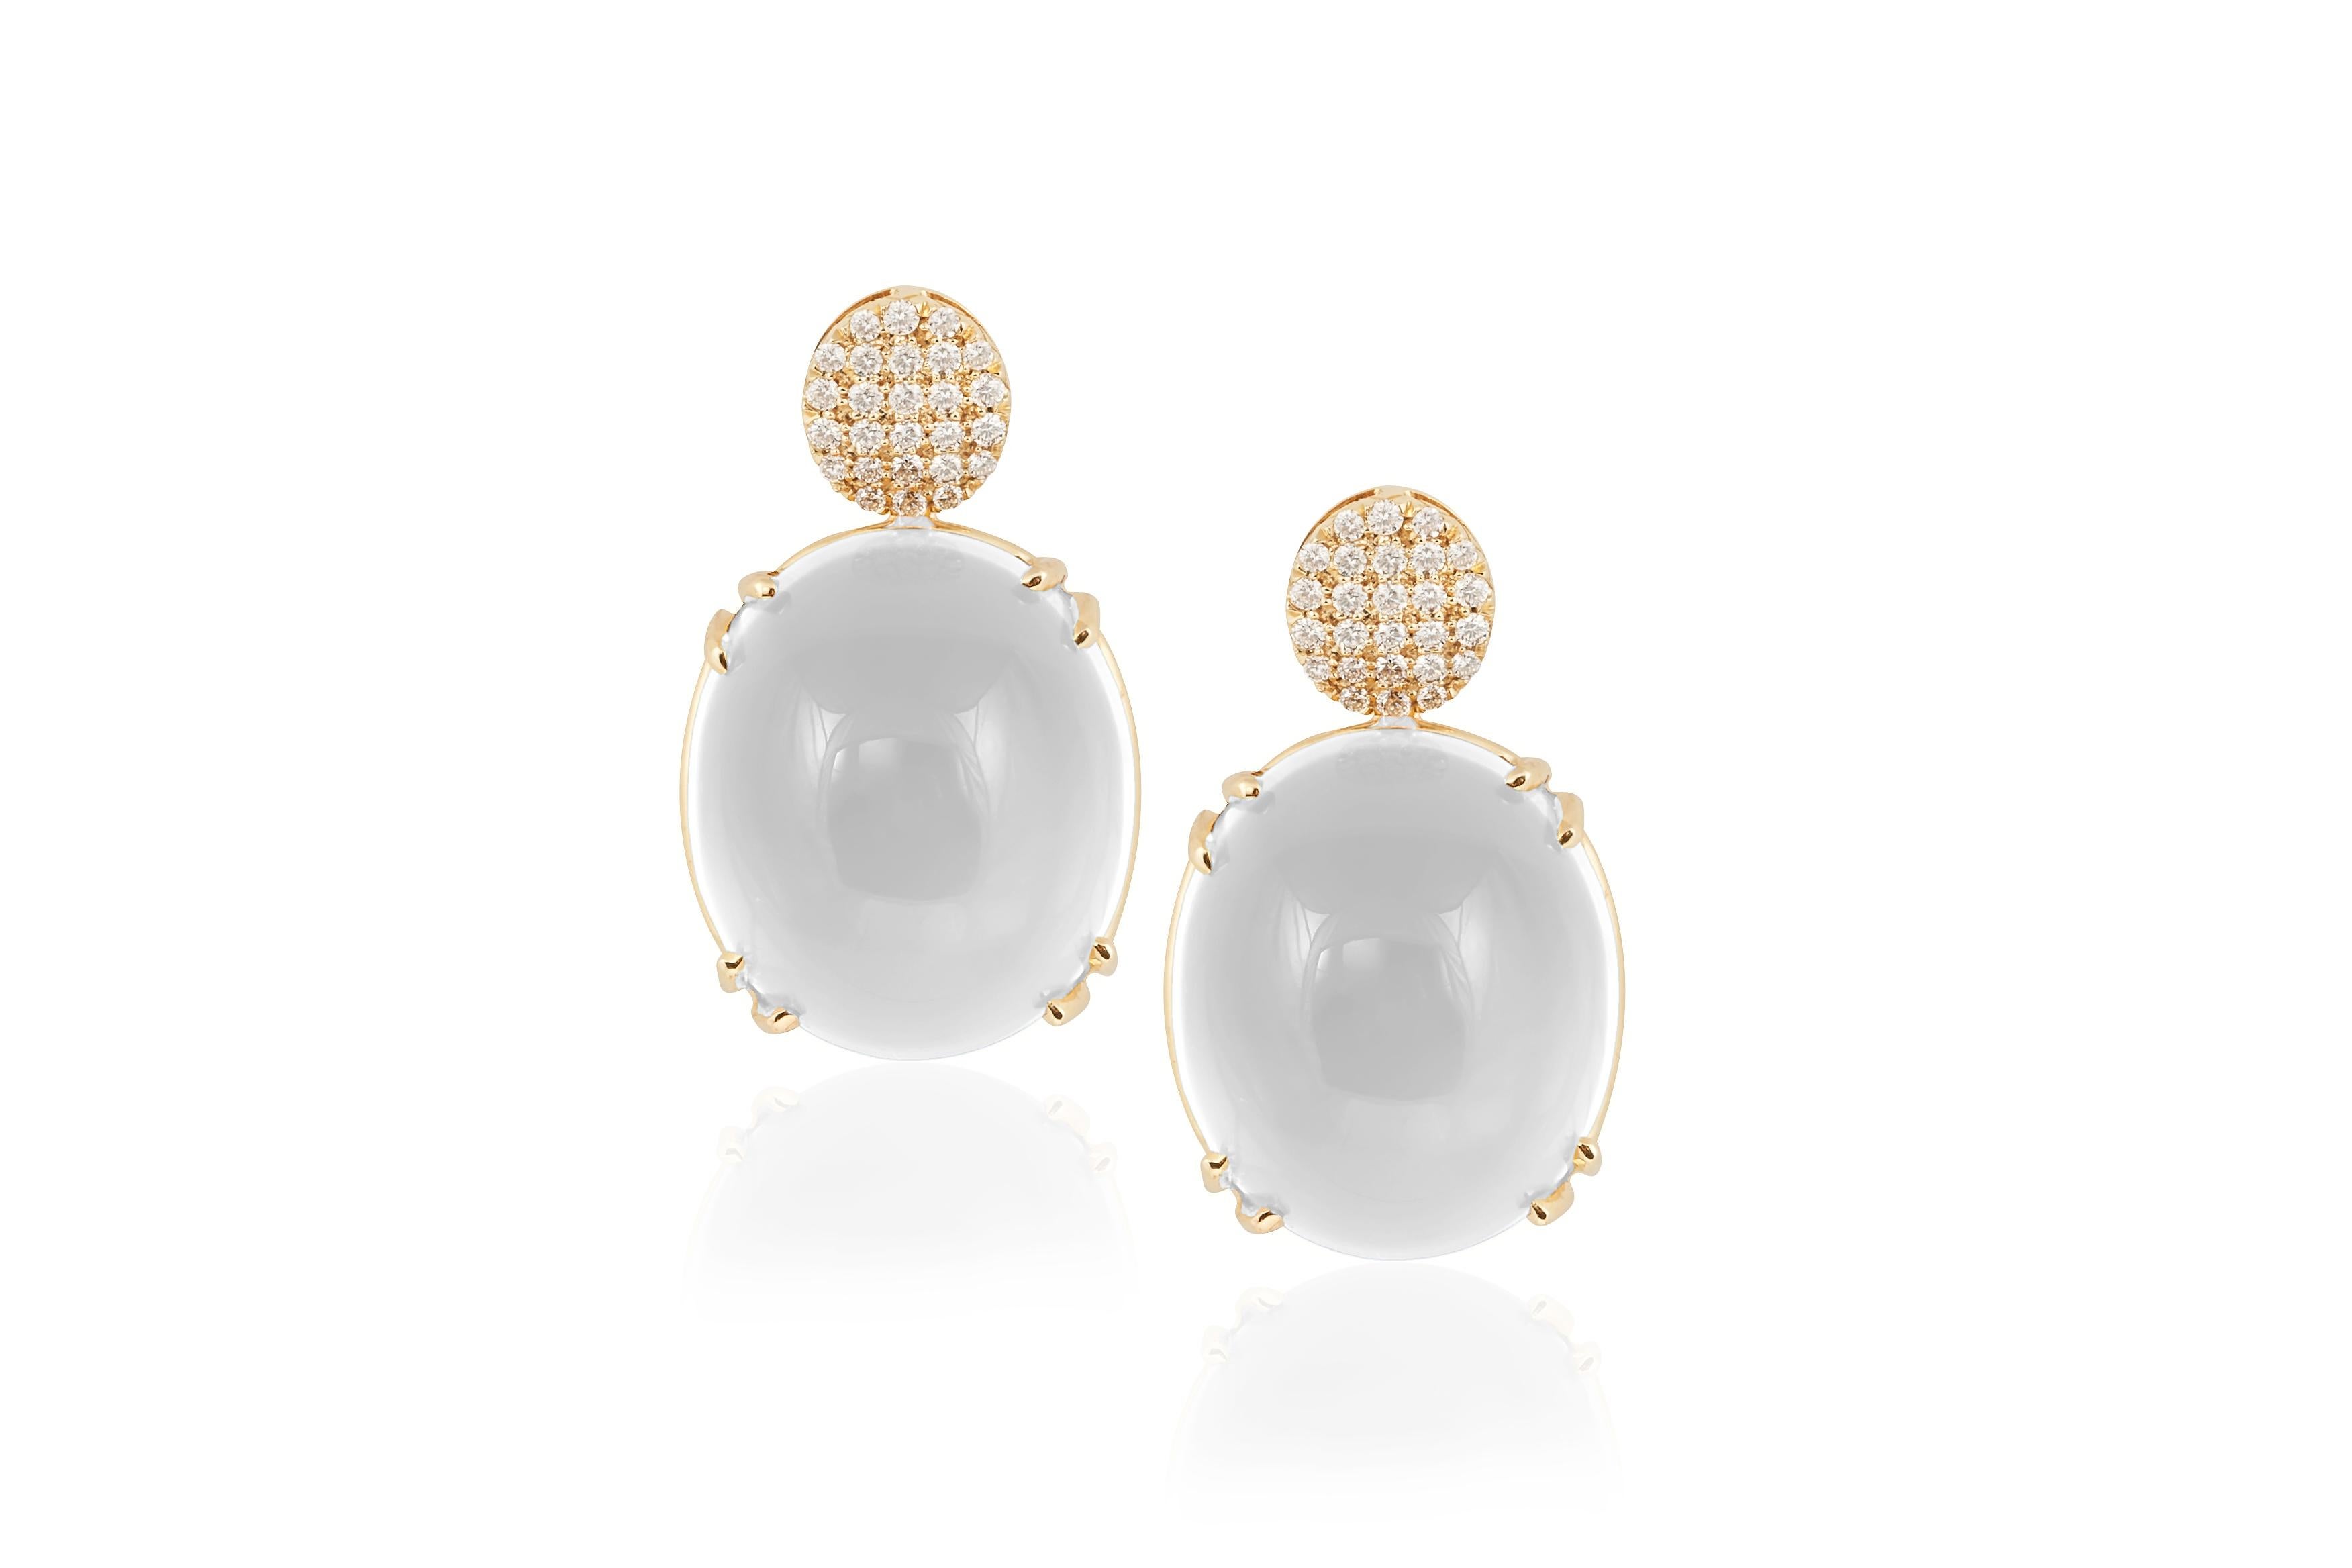 Moon Quartz Oval Cab with Diamonds Motif Earrings from the exquisite 'Rock 'N Roll' Collection. Crafted in stunning 18K Yellow Gold, these earrings are a harmonious blend of elegance and edginess. The focal point of each earring is a lustrous Moon